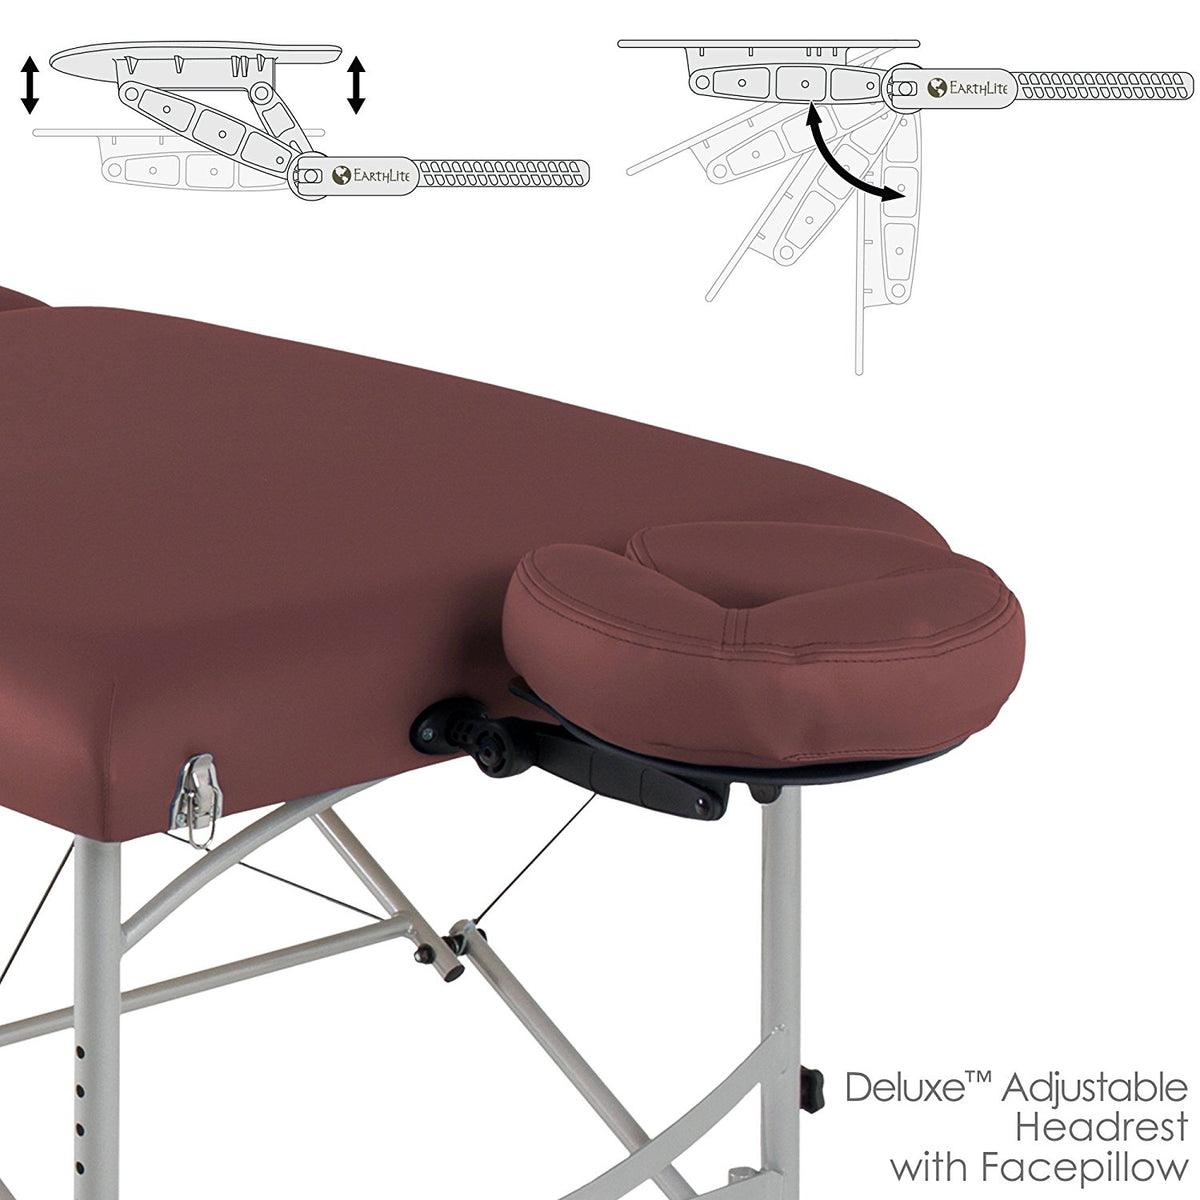 Stronglite - Versalite Pro Portable Massage Table Package 30&quot; - Superb Massage Tables